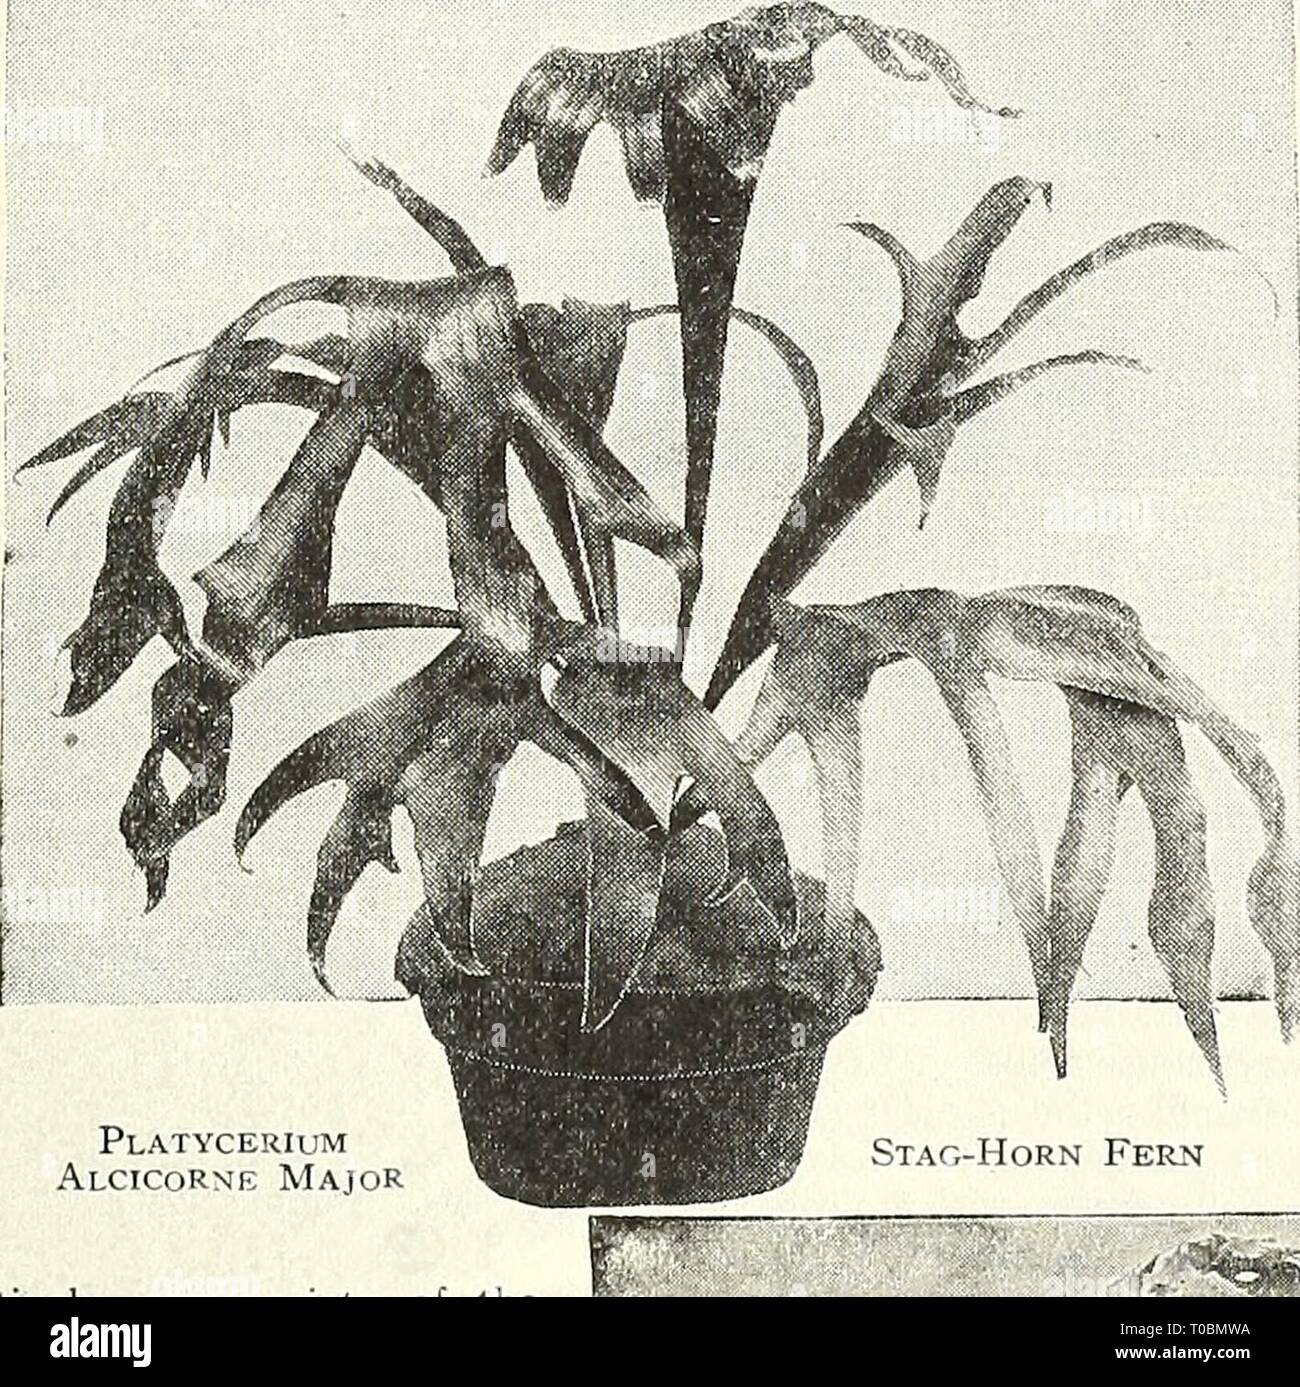 Dreer's garden book 1931 (1931) Dreer's garden book 1931 dreersgardenbook1931henr Year: 1931  Dreer's Fine Ferns Adiantum Cuneatum. This is the well-known fine-leaved Maiden Hair variety so exten- â sively used in connection with cut flowers. 3-inch pots, 25 cts. each. Adiantum Farleyense Glor- iosa {Tkf Glory Fern). An easy-growing form of that most beautiful of all Maiden-Hairs, Adiantum Farleyense. Good plants, in 3-inch pots, 50 cts. each; 4-inch pots, $1.00 each. Platycerium Alcicorne Major Dreer's Fine FernsâContinued Pteris Alexandrae. The crested fronds of this pretty variety are varie Stock Photo